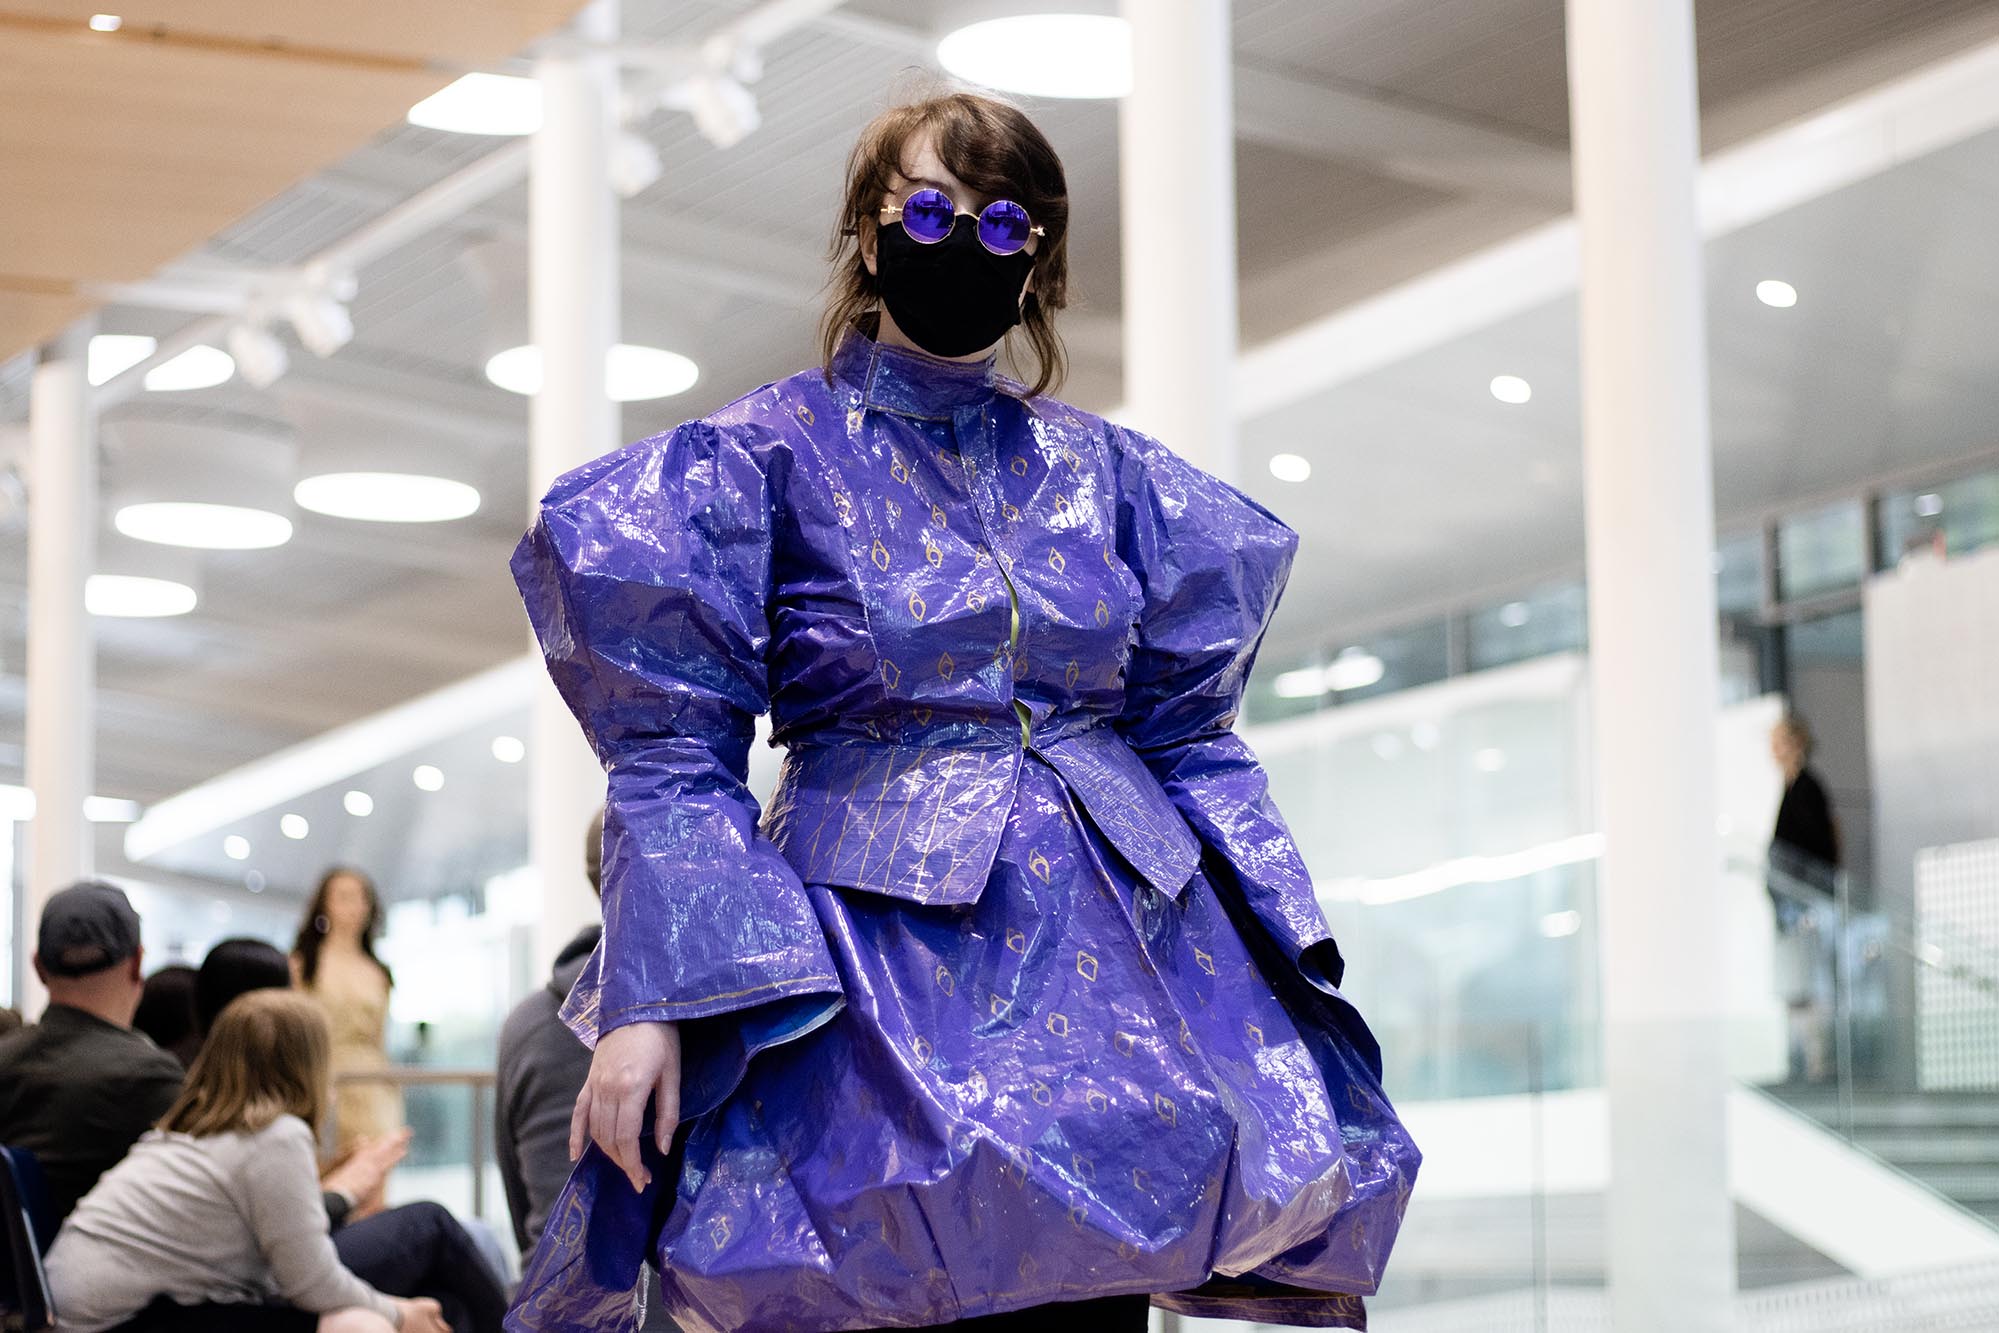 A model wears a purple suit jacket and skirt made from tarp or vinyl billboard. The female model also wears a black face mask and round purple glasses.